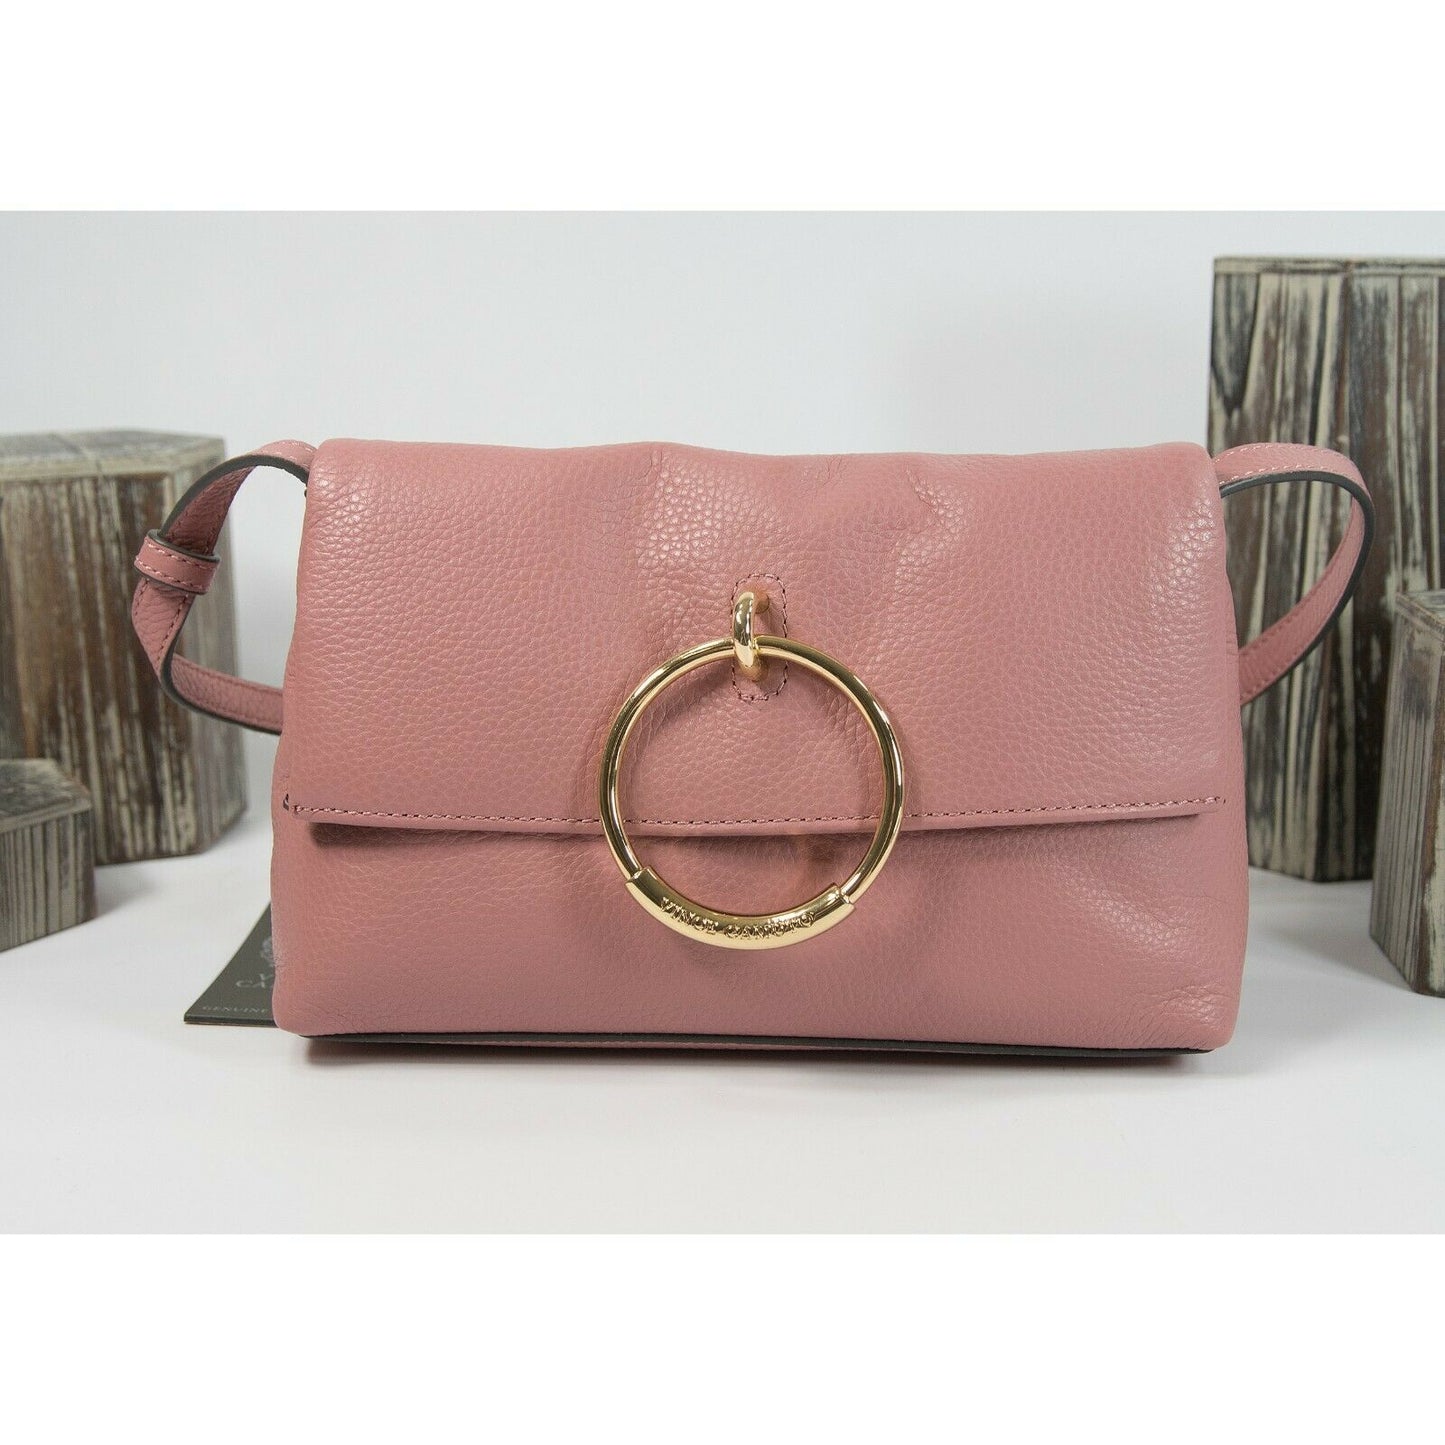 Vince Camuto Cherry Blossom Pink Leather Raynas Small Crossbody Bag NWT